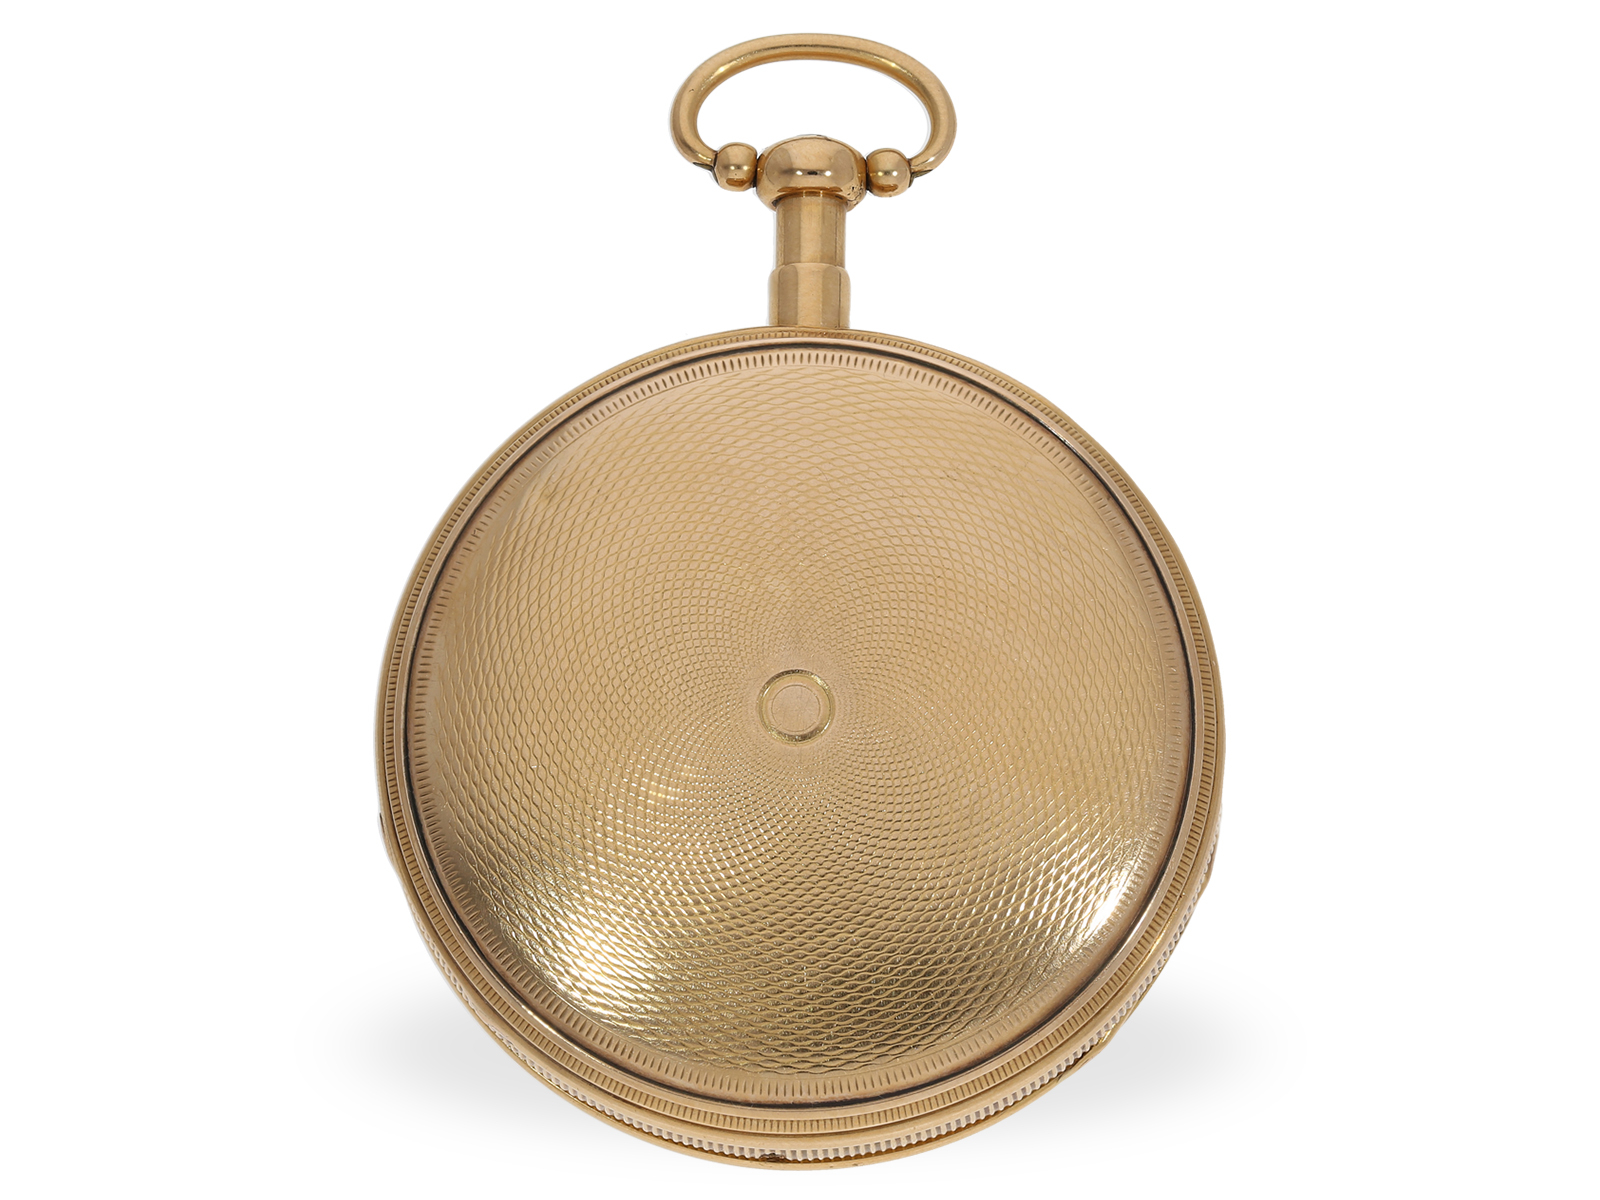 Pocket watch: 18K gold cylinder watch with repeater and musical movement, ca. 1820 - Image 5 of 5